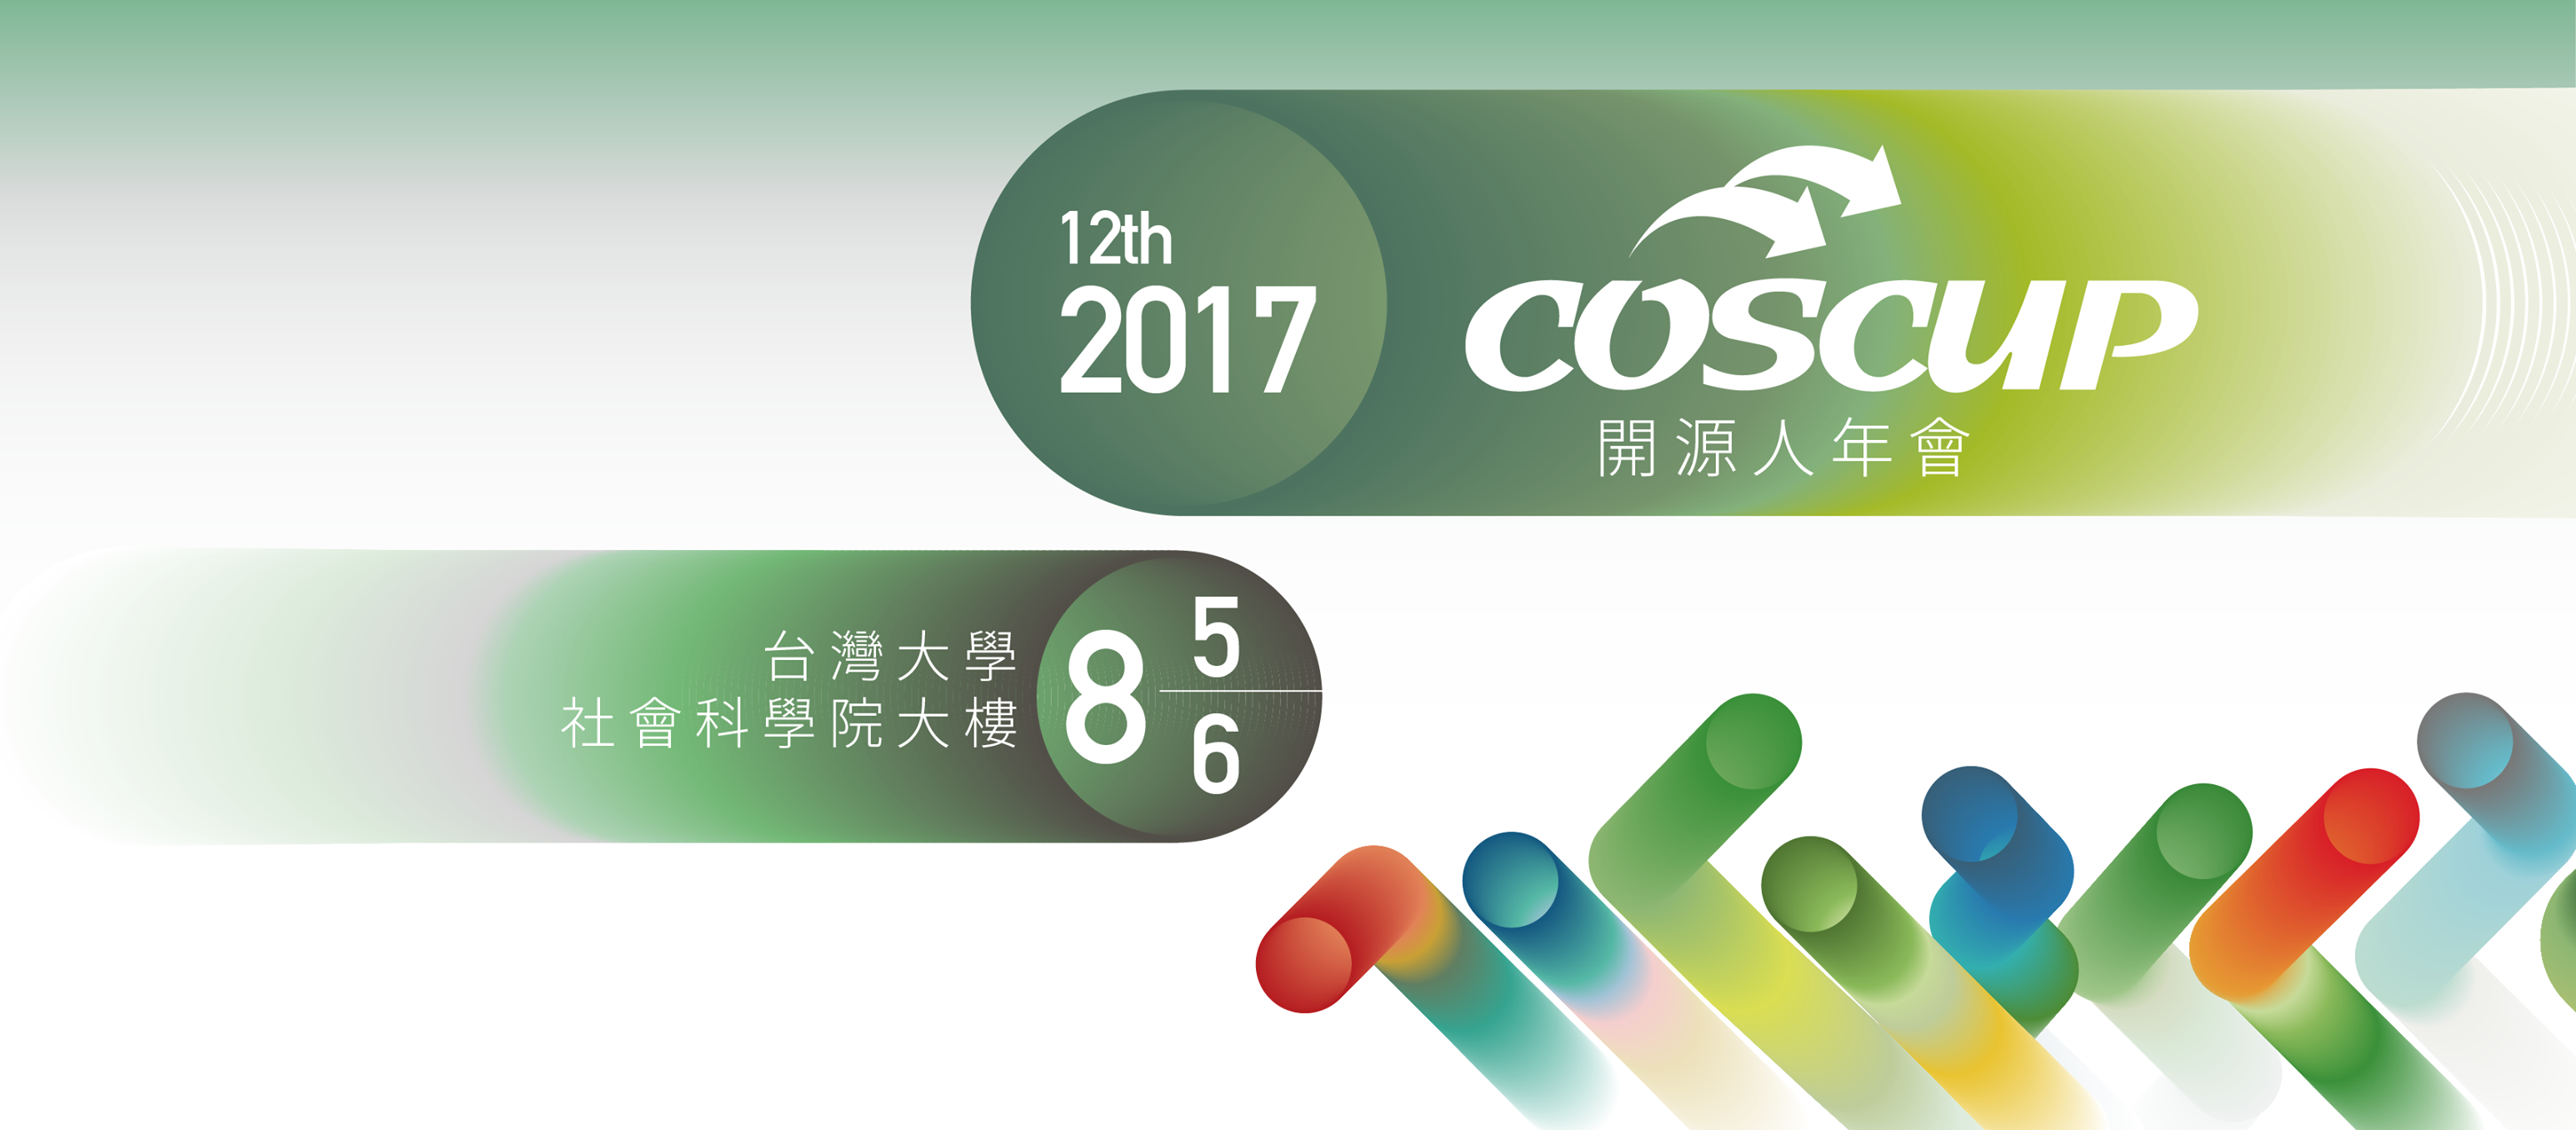 Event cover image for COSCUP 2017